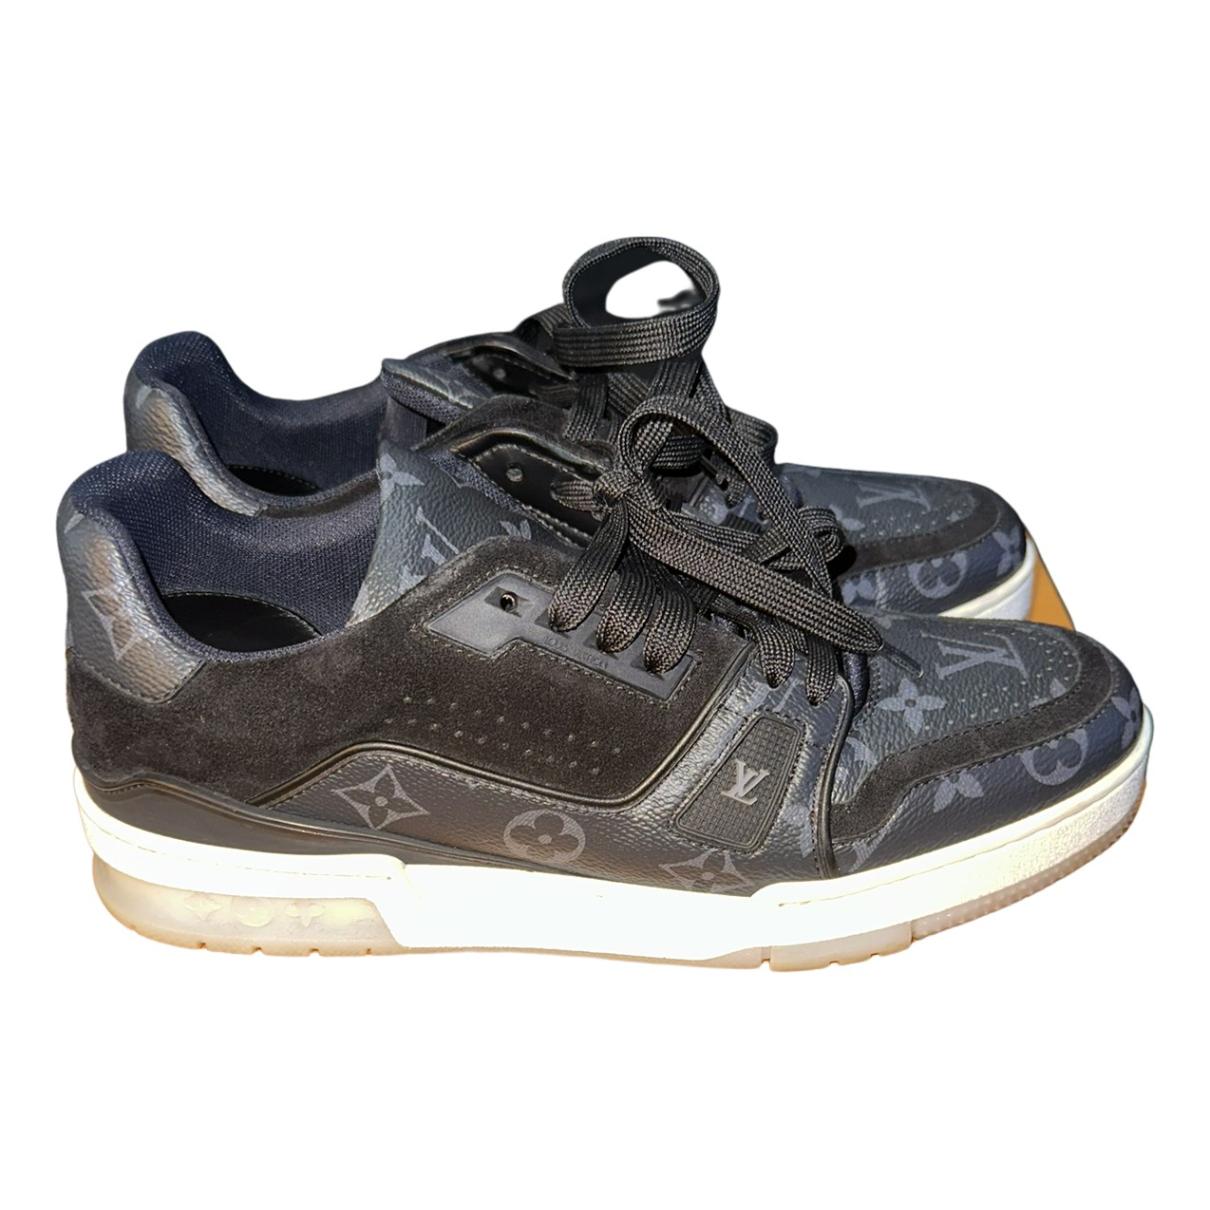 Lv trainer low trainers Louis Vuitton Blue size 7 UK in Other - 37394594